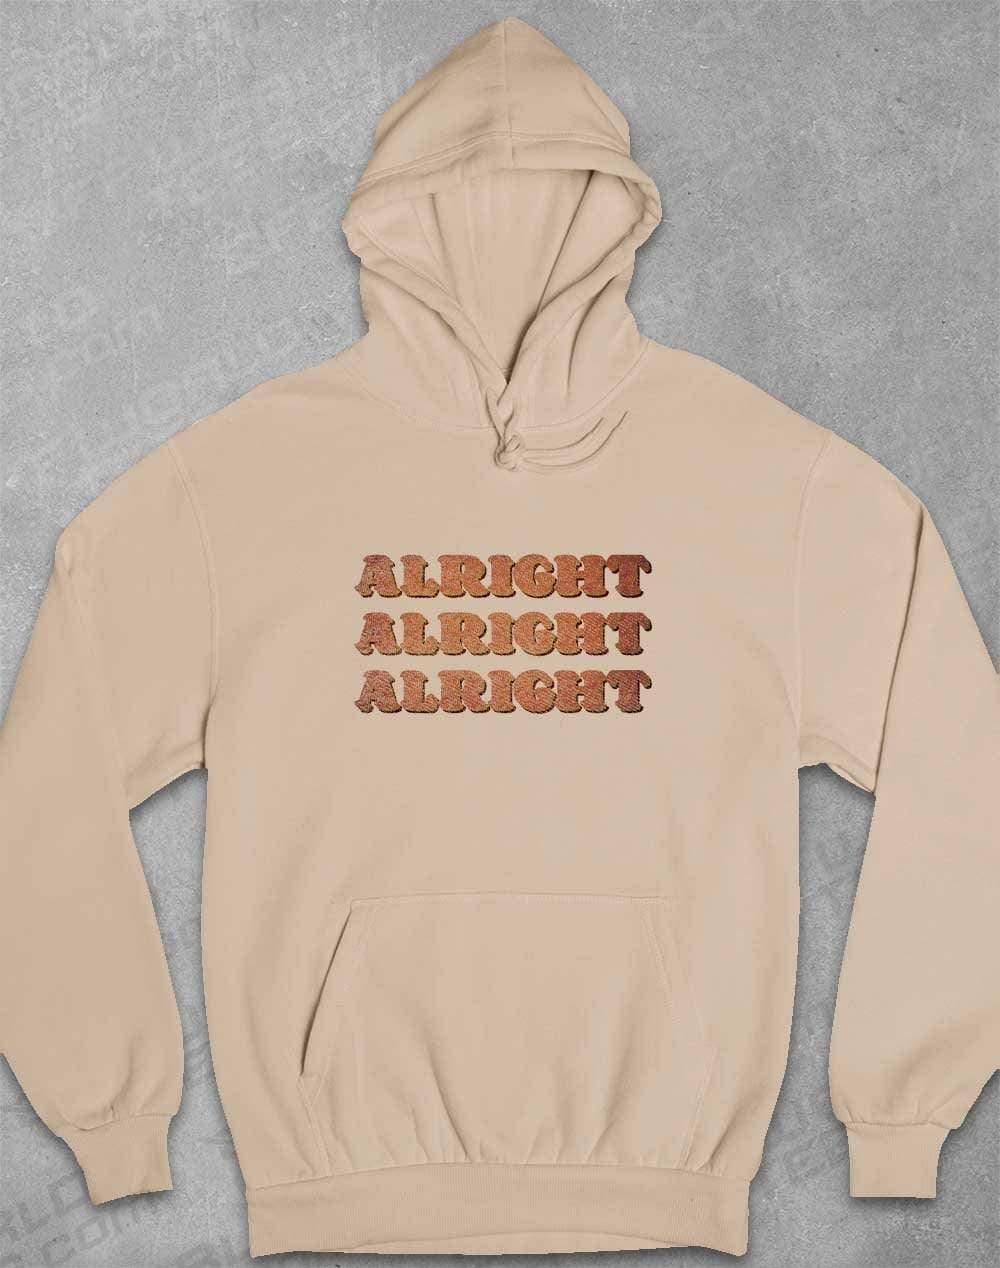 Alright Alright Alright Hoodie XS / Desert Sand  - Off World Tees